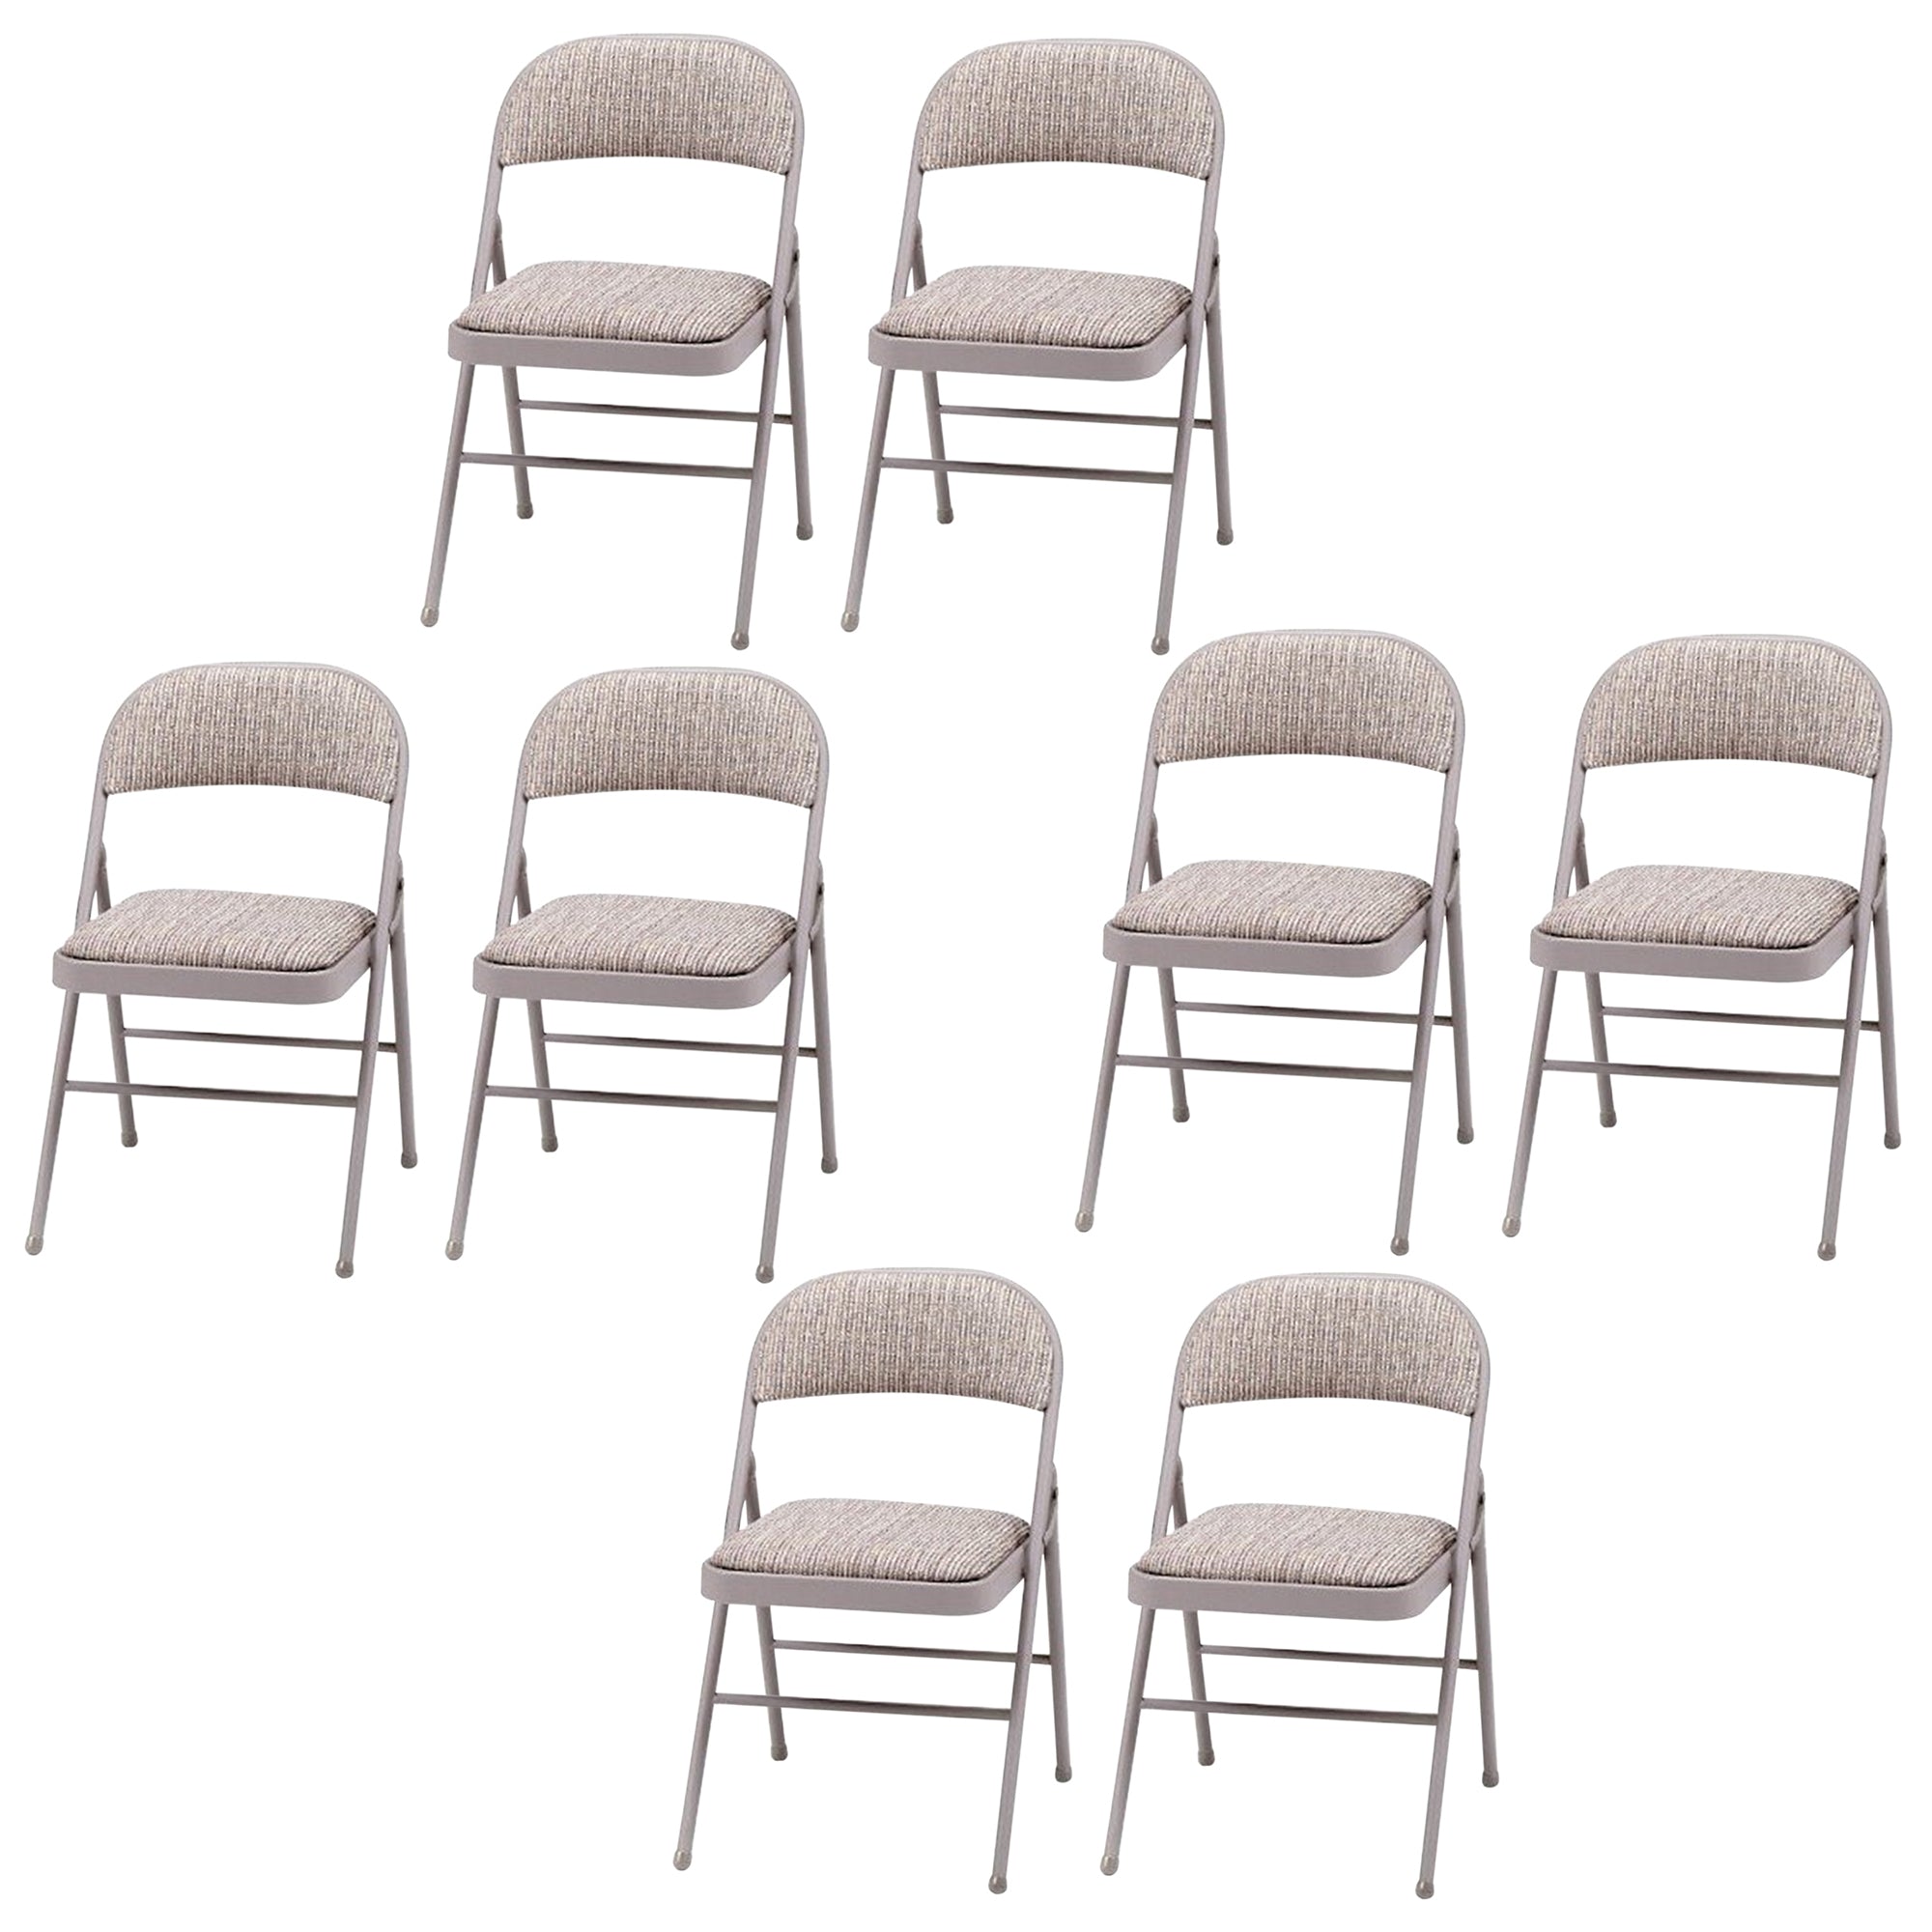 Deluxe Comfort Folding Chairs